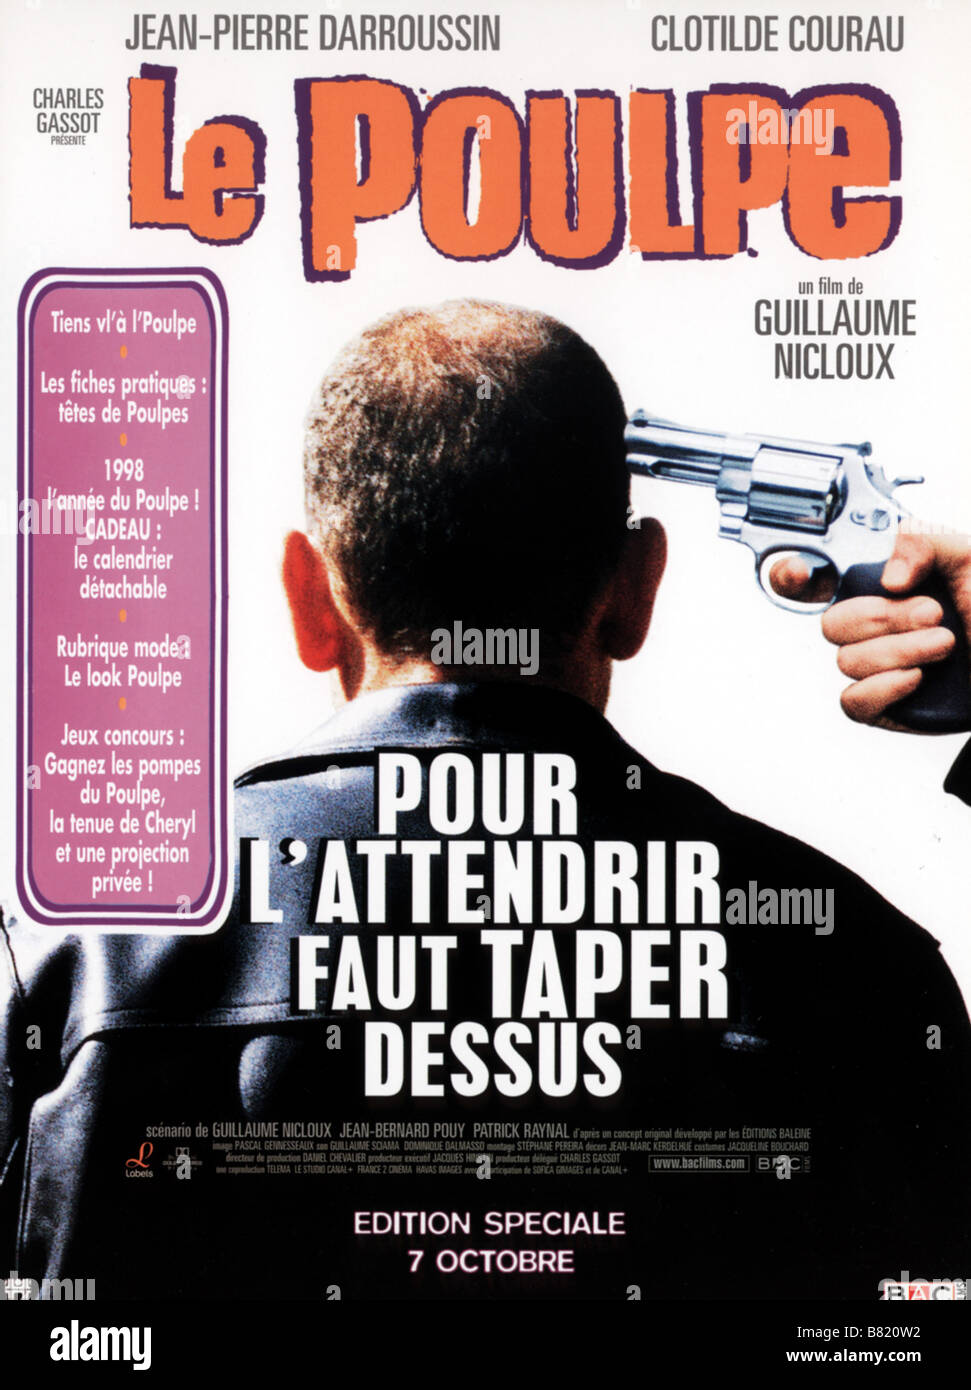 Poulpe, Le Poulpe, Le  Year: 1998 - france Jean-Pierre Darroussin Affiche , Poster  Director: Guillaume Nicloux Stock Photo